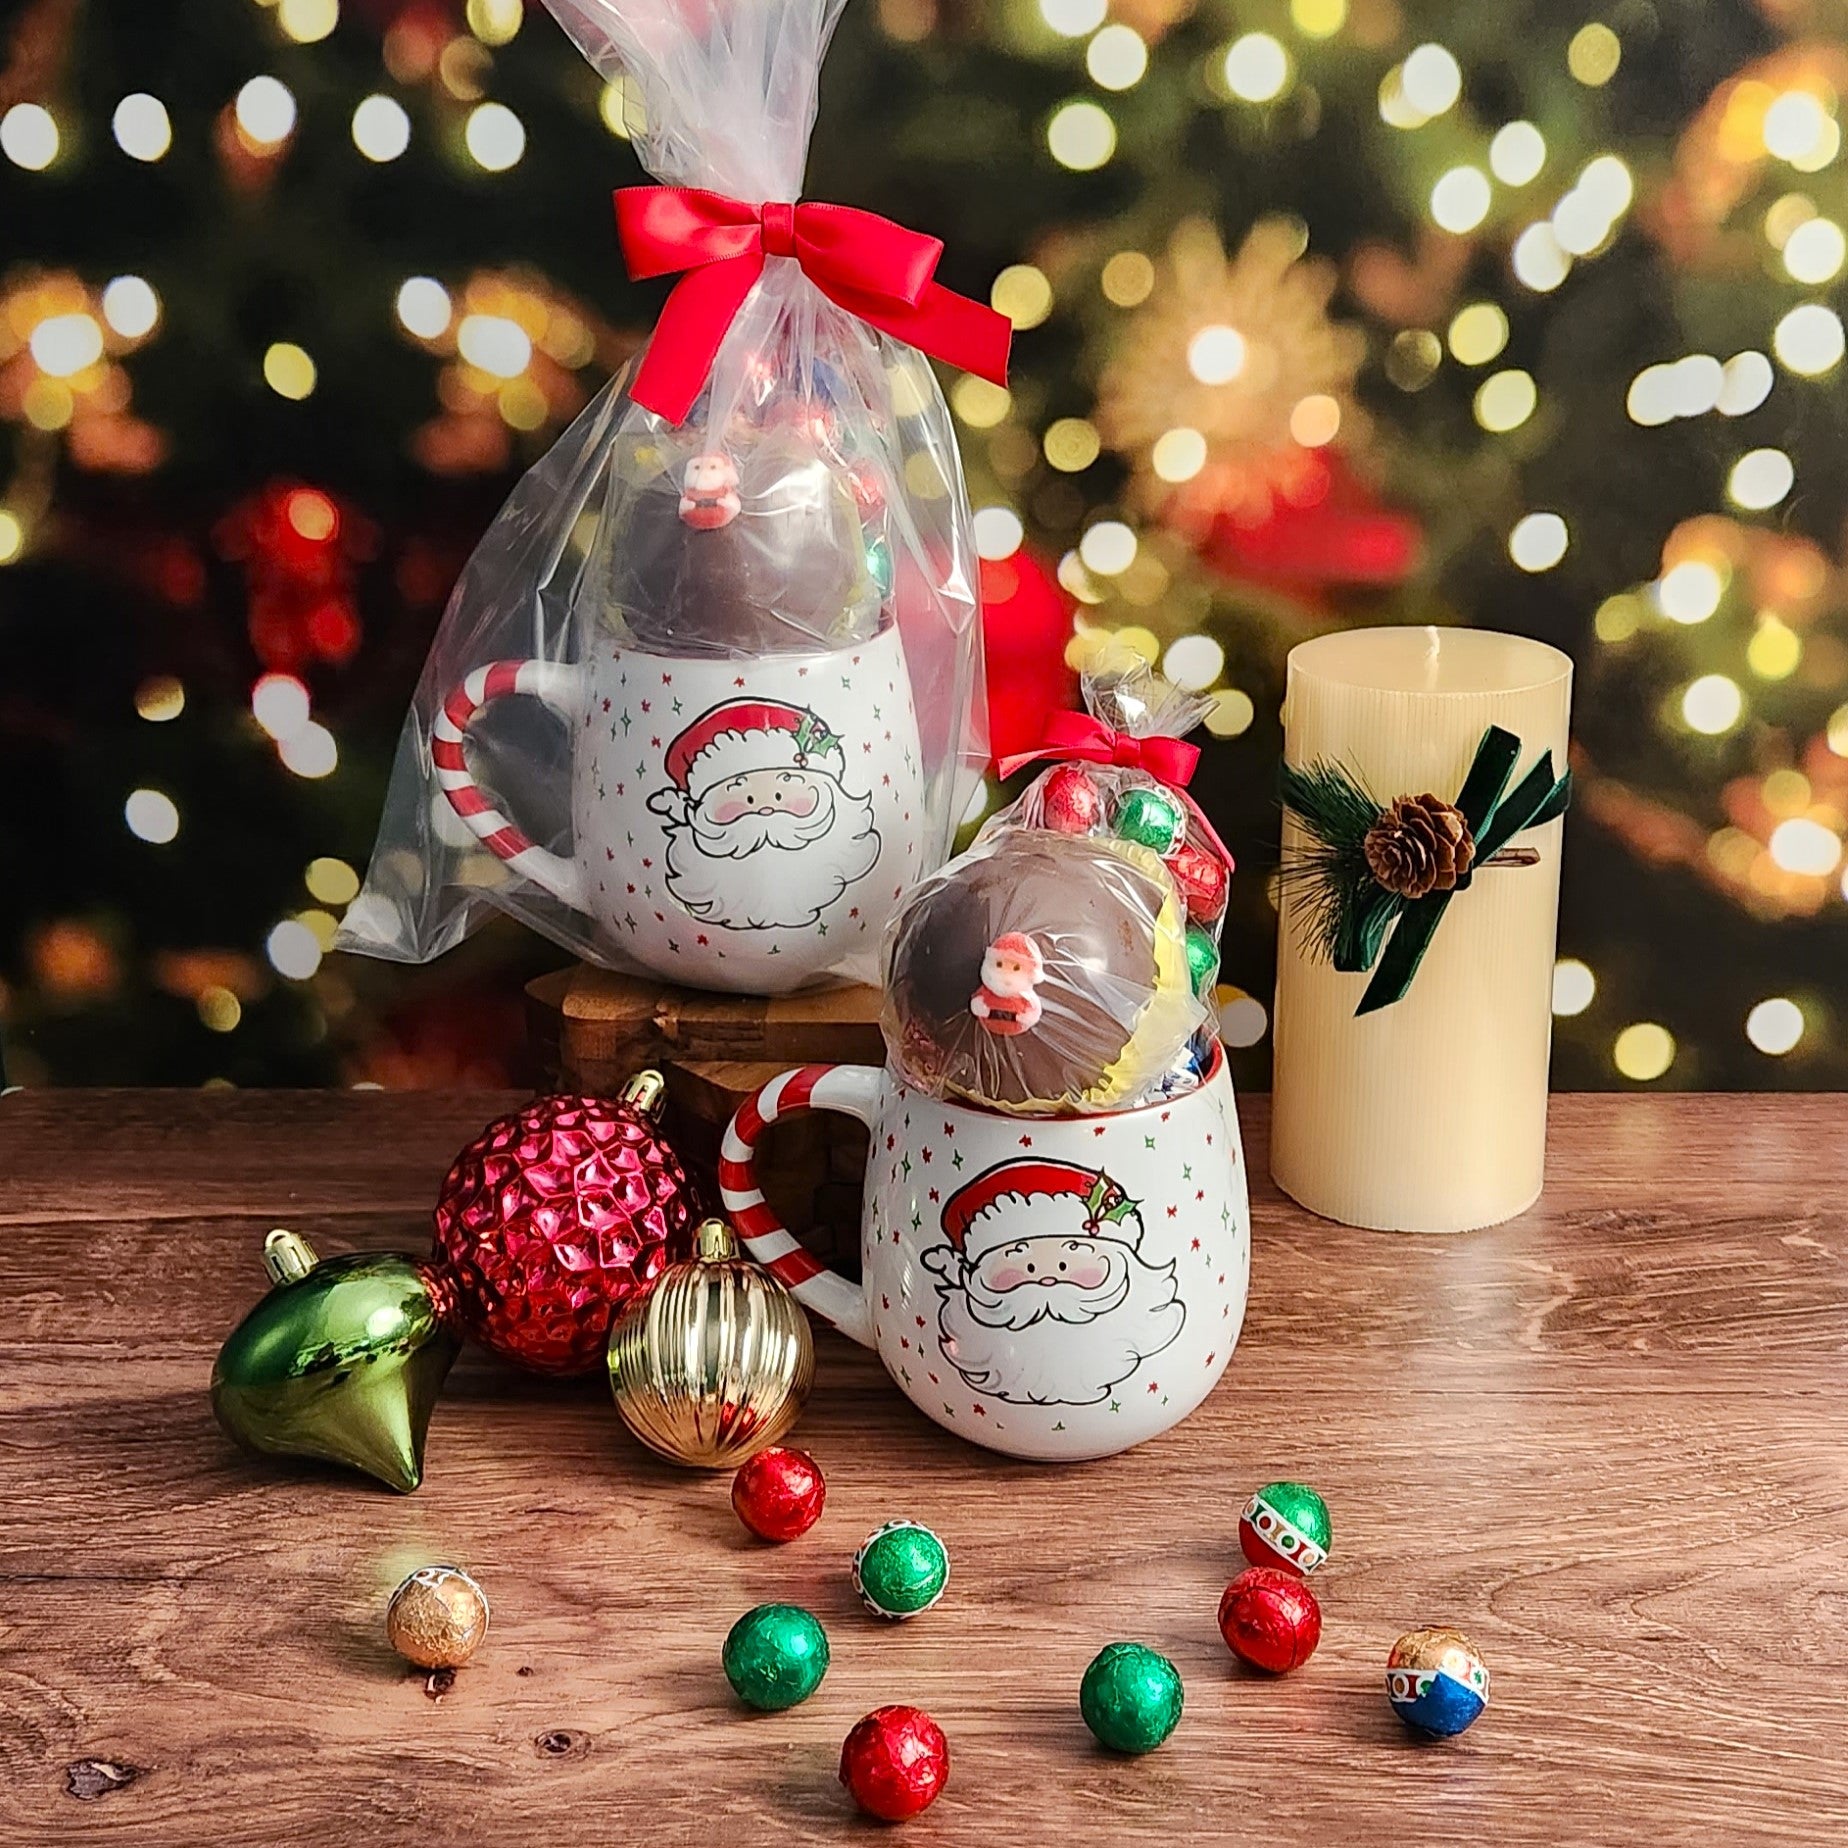 Start your day with a smile! This ceramic Santa mug says 'He knows when you're awake' and comes with a Milk Chocolate Hot Cocoa Bomb and 4 oz. of Milk Chocolate Foiled Ornaments from Stage Stop Candy on Cape Cod. 